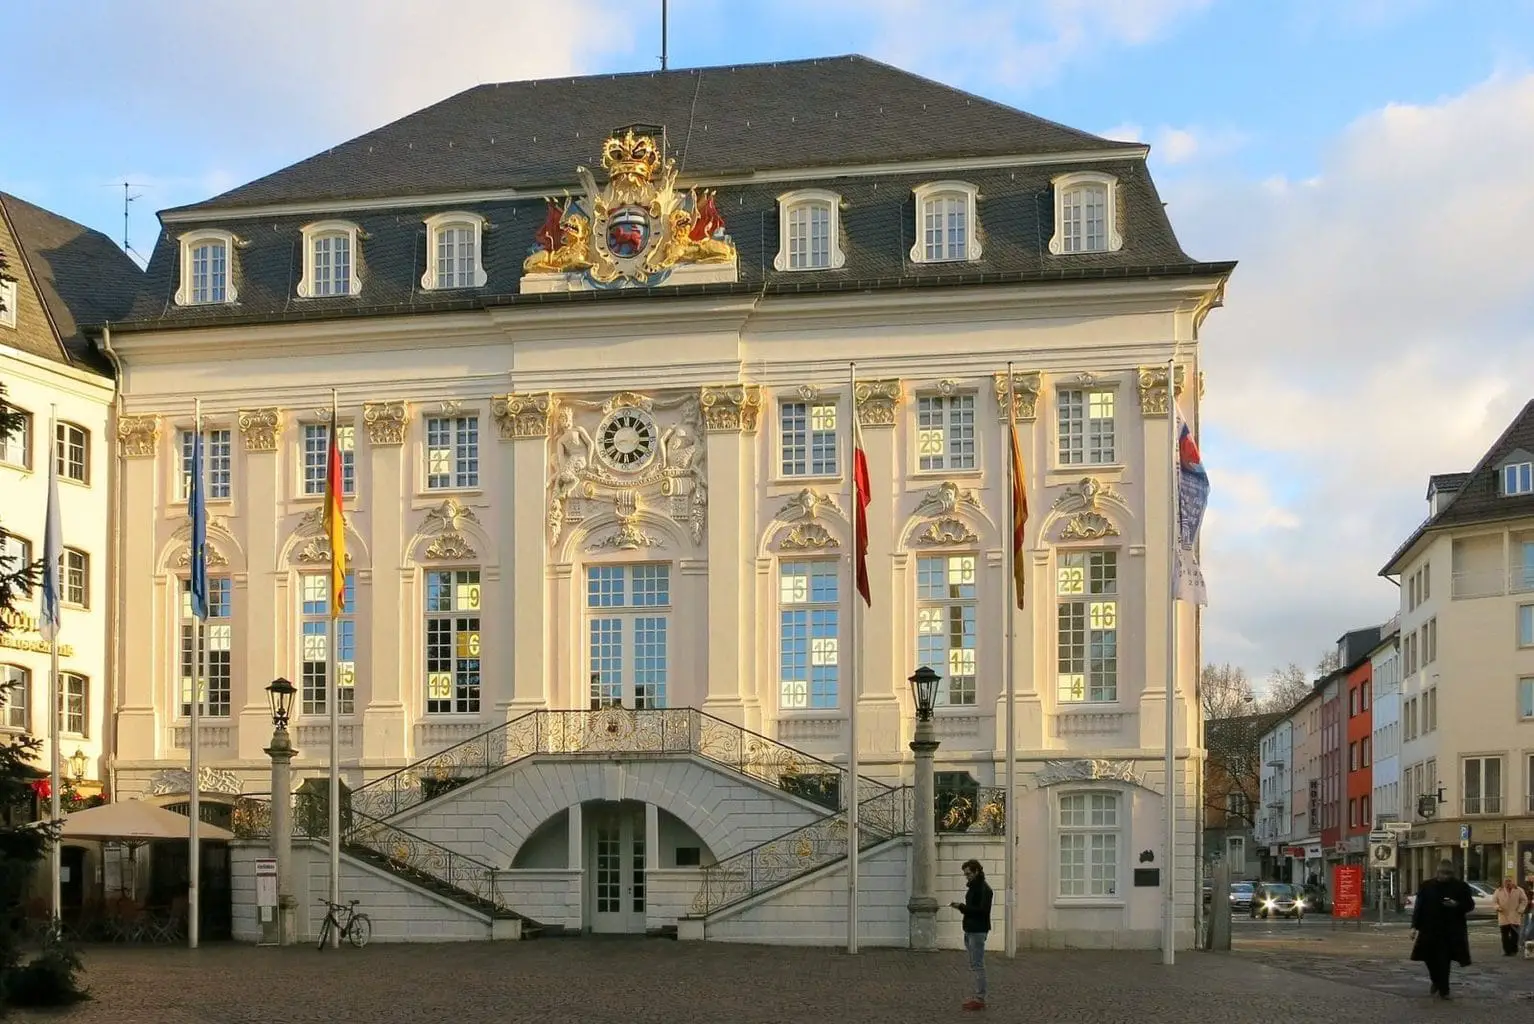 The Altes Rathaus in Bonn, Germany